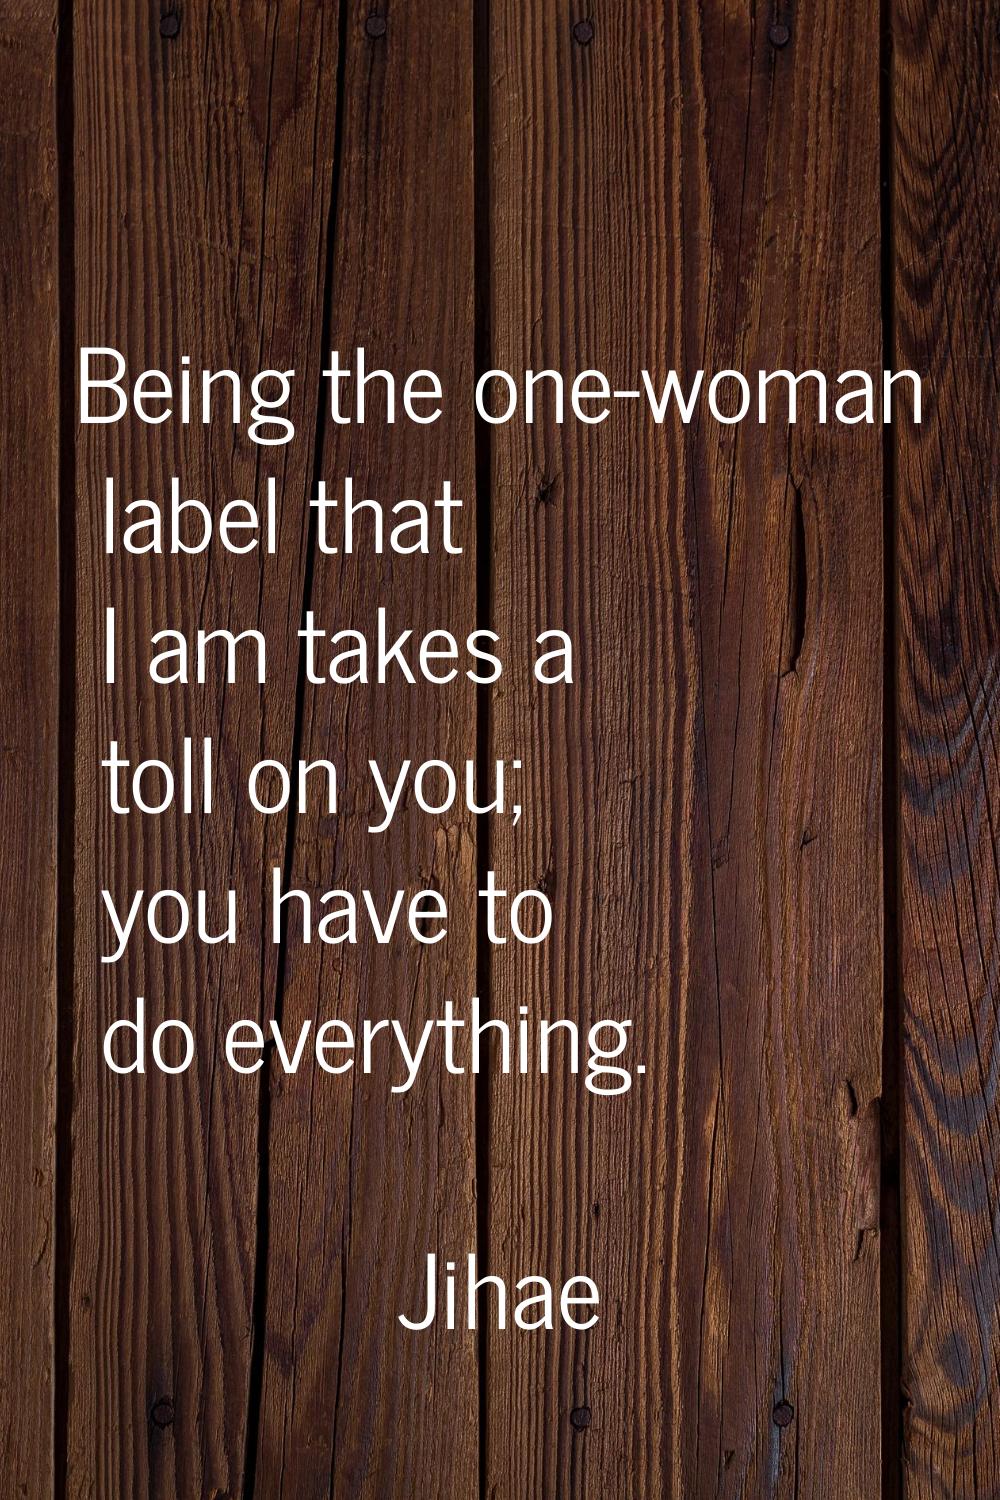 Being the one-woman label that I am takes a toll on you; you have to do everything.